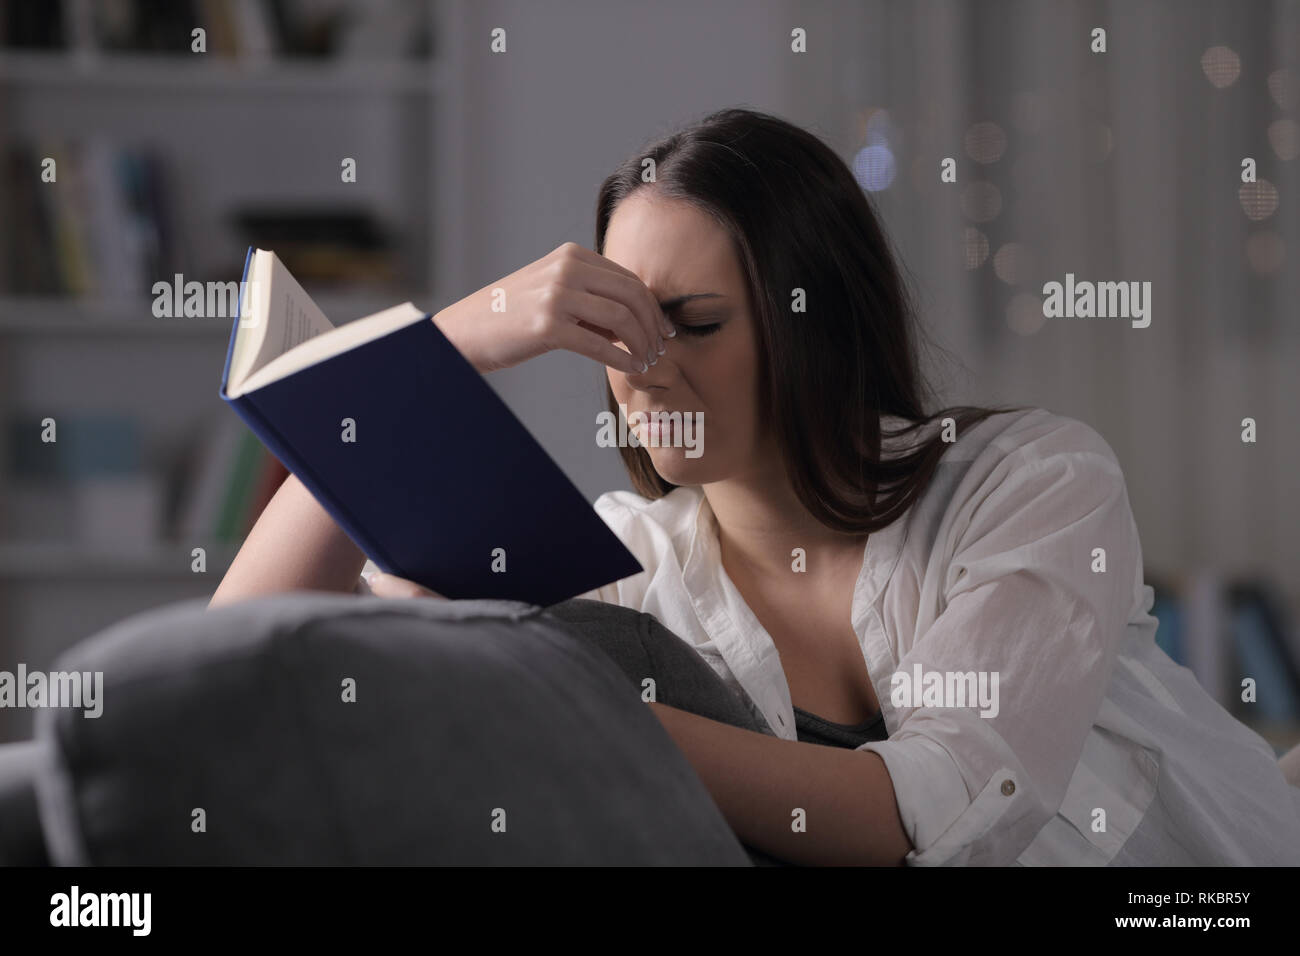 Lady suffering eyestrain reading book sitting on a couch in the night at home Stock Photo